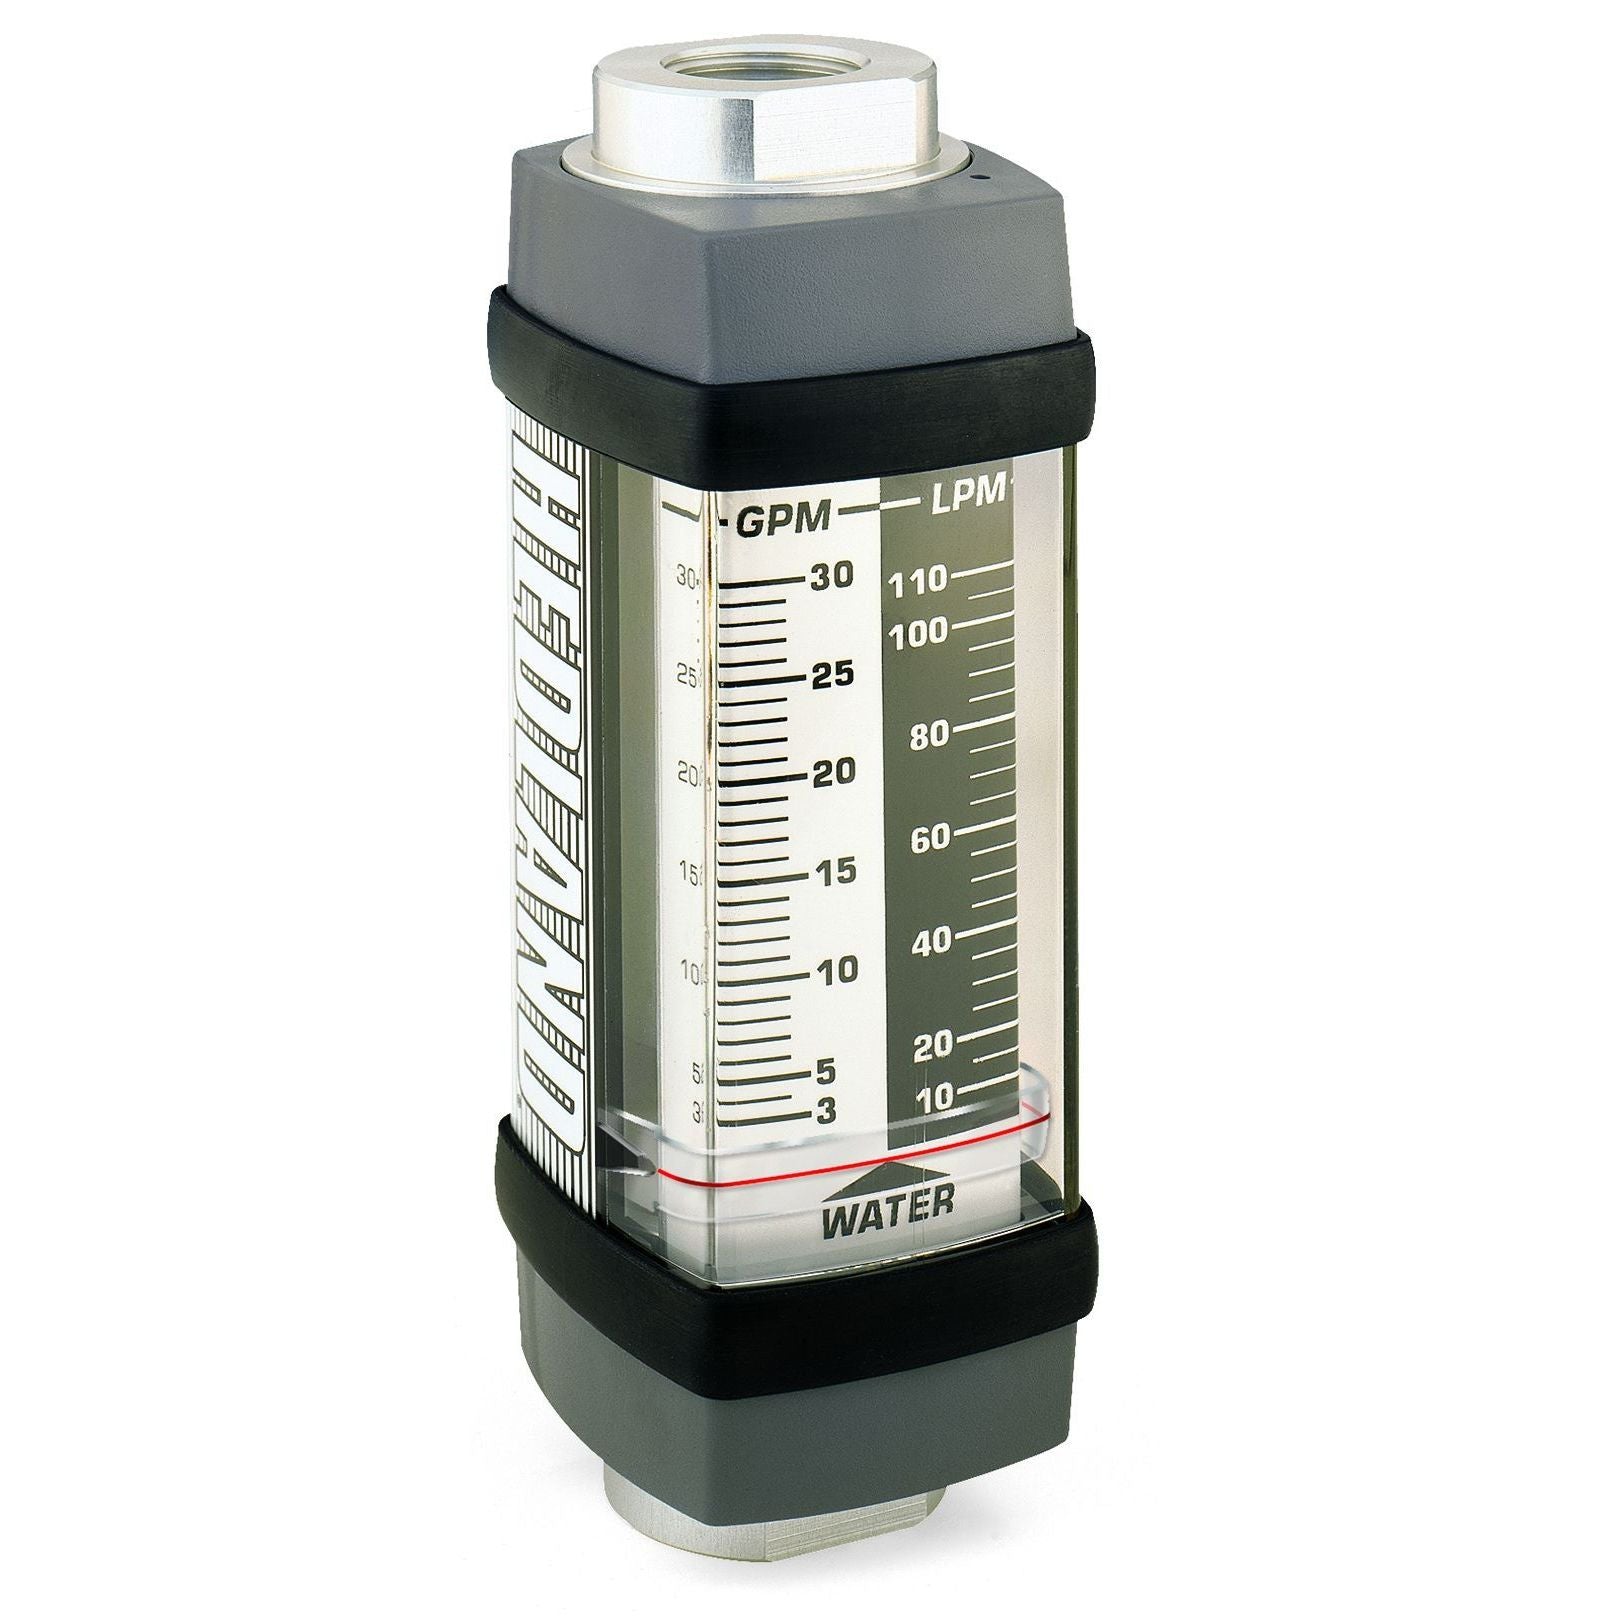 H741X-020 : Hedland 5000psi 316SS Flow Meter for Caustic or Corrosive Liquids, 1 NPT, 2 to 20 GPM